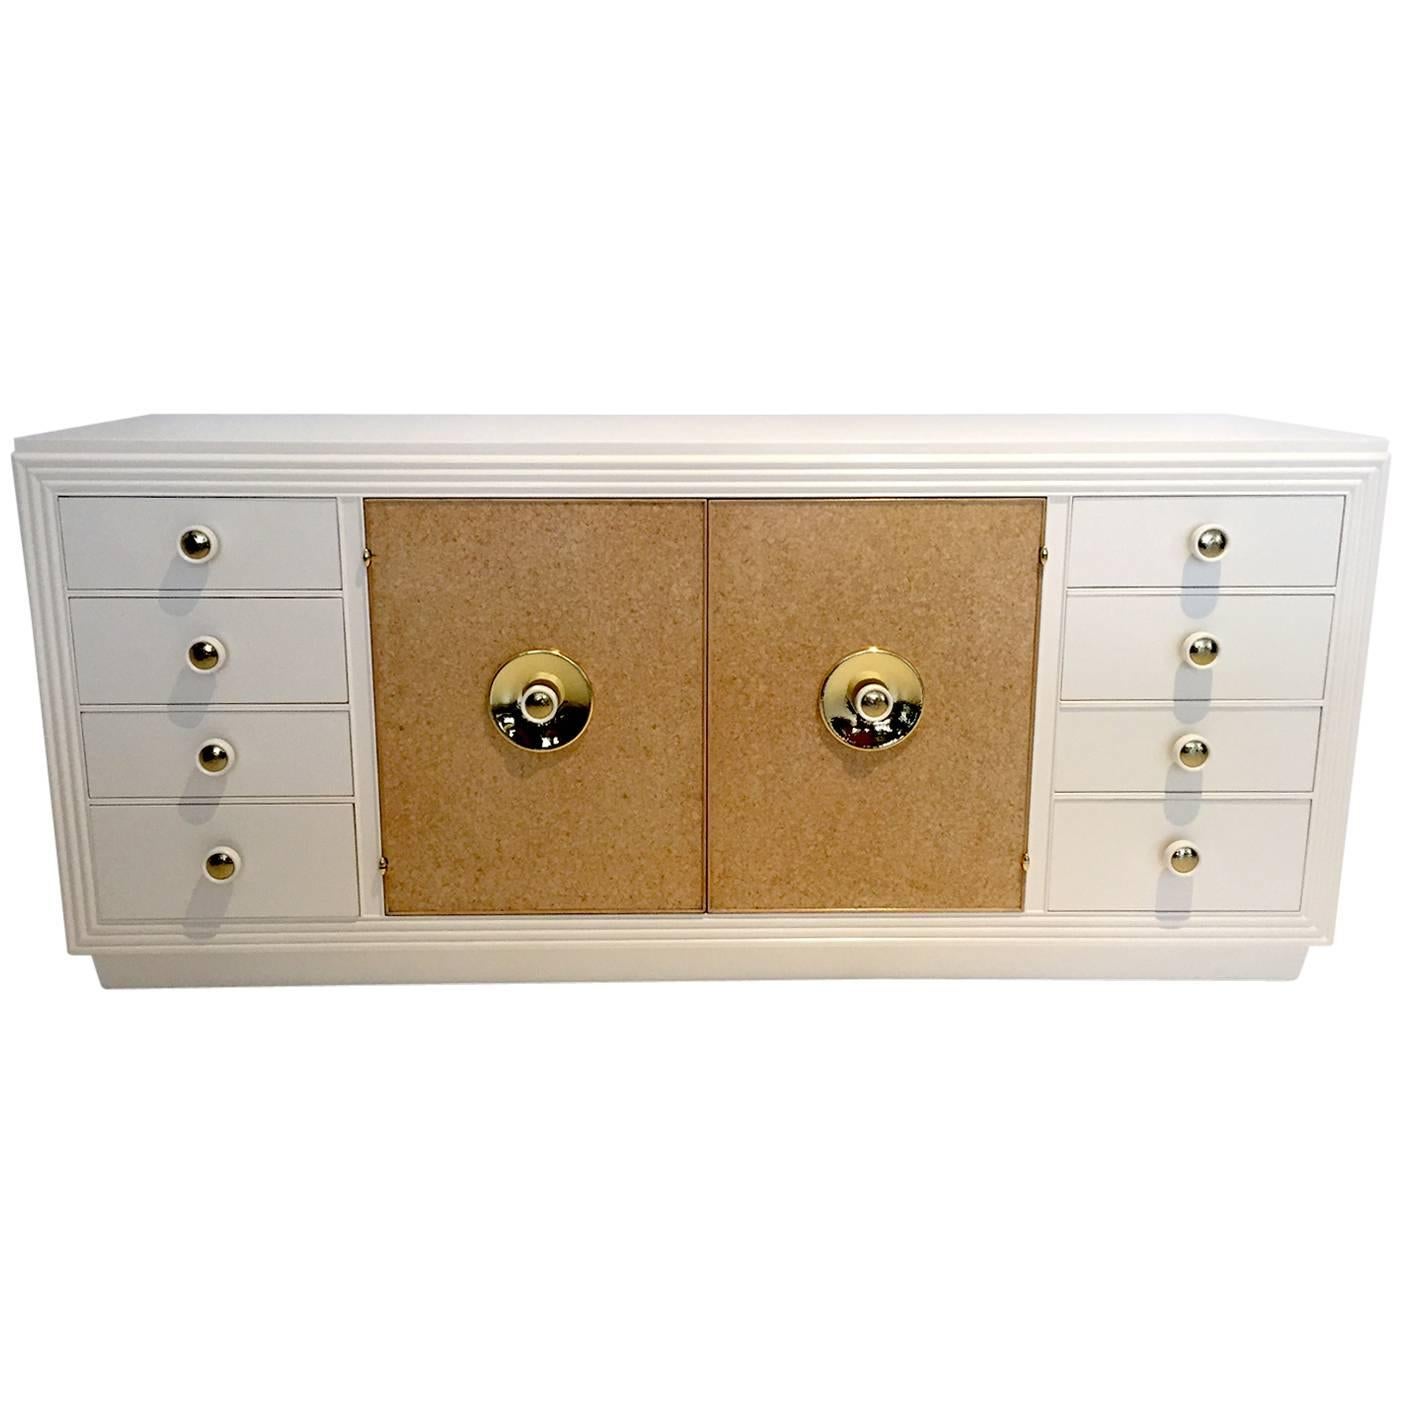 Paul Frankl Sideboard with Lacquered Cork and Brass For Sale